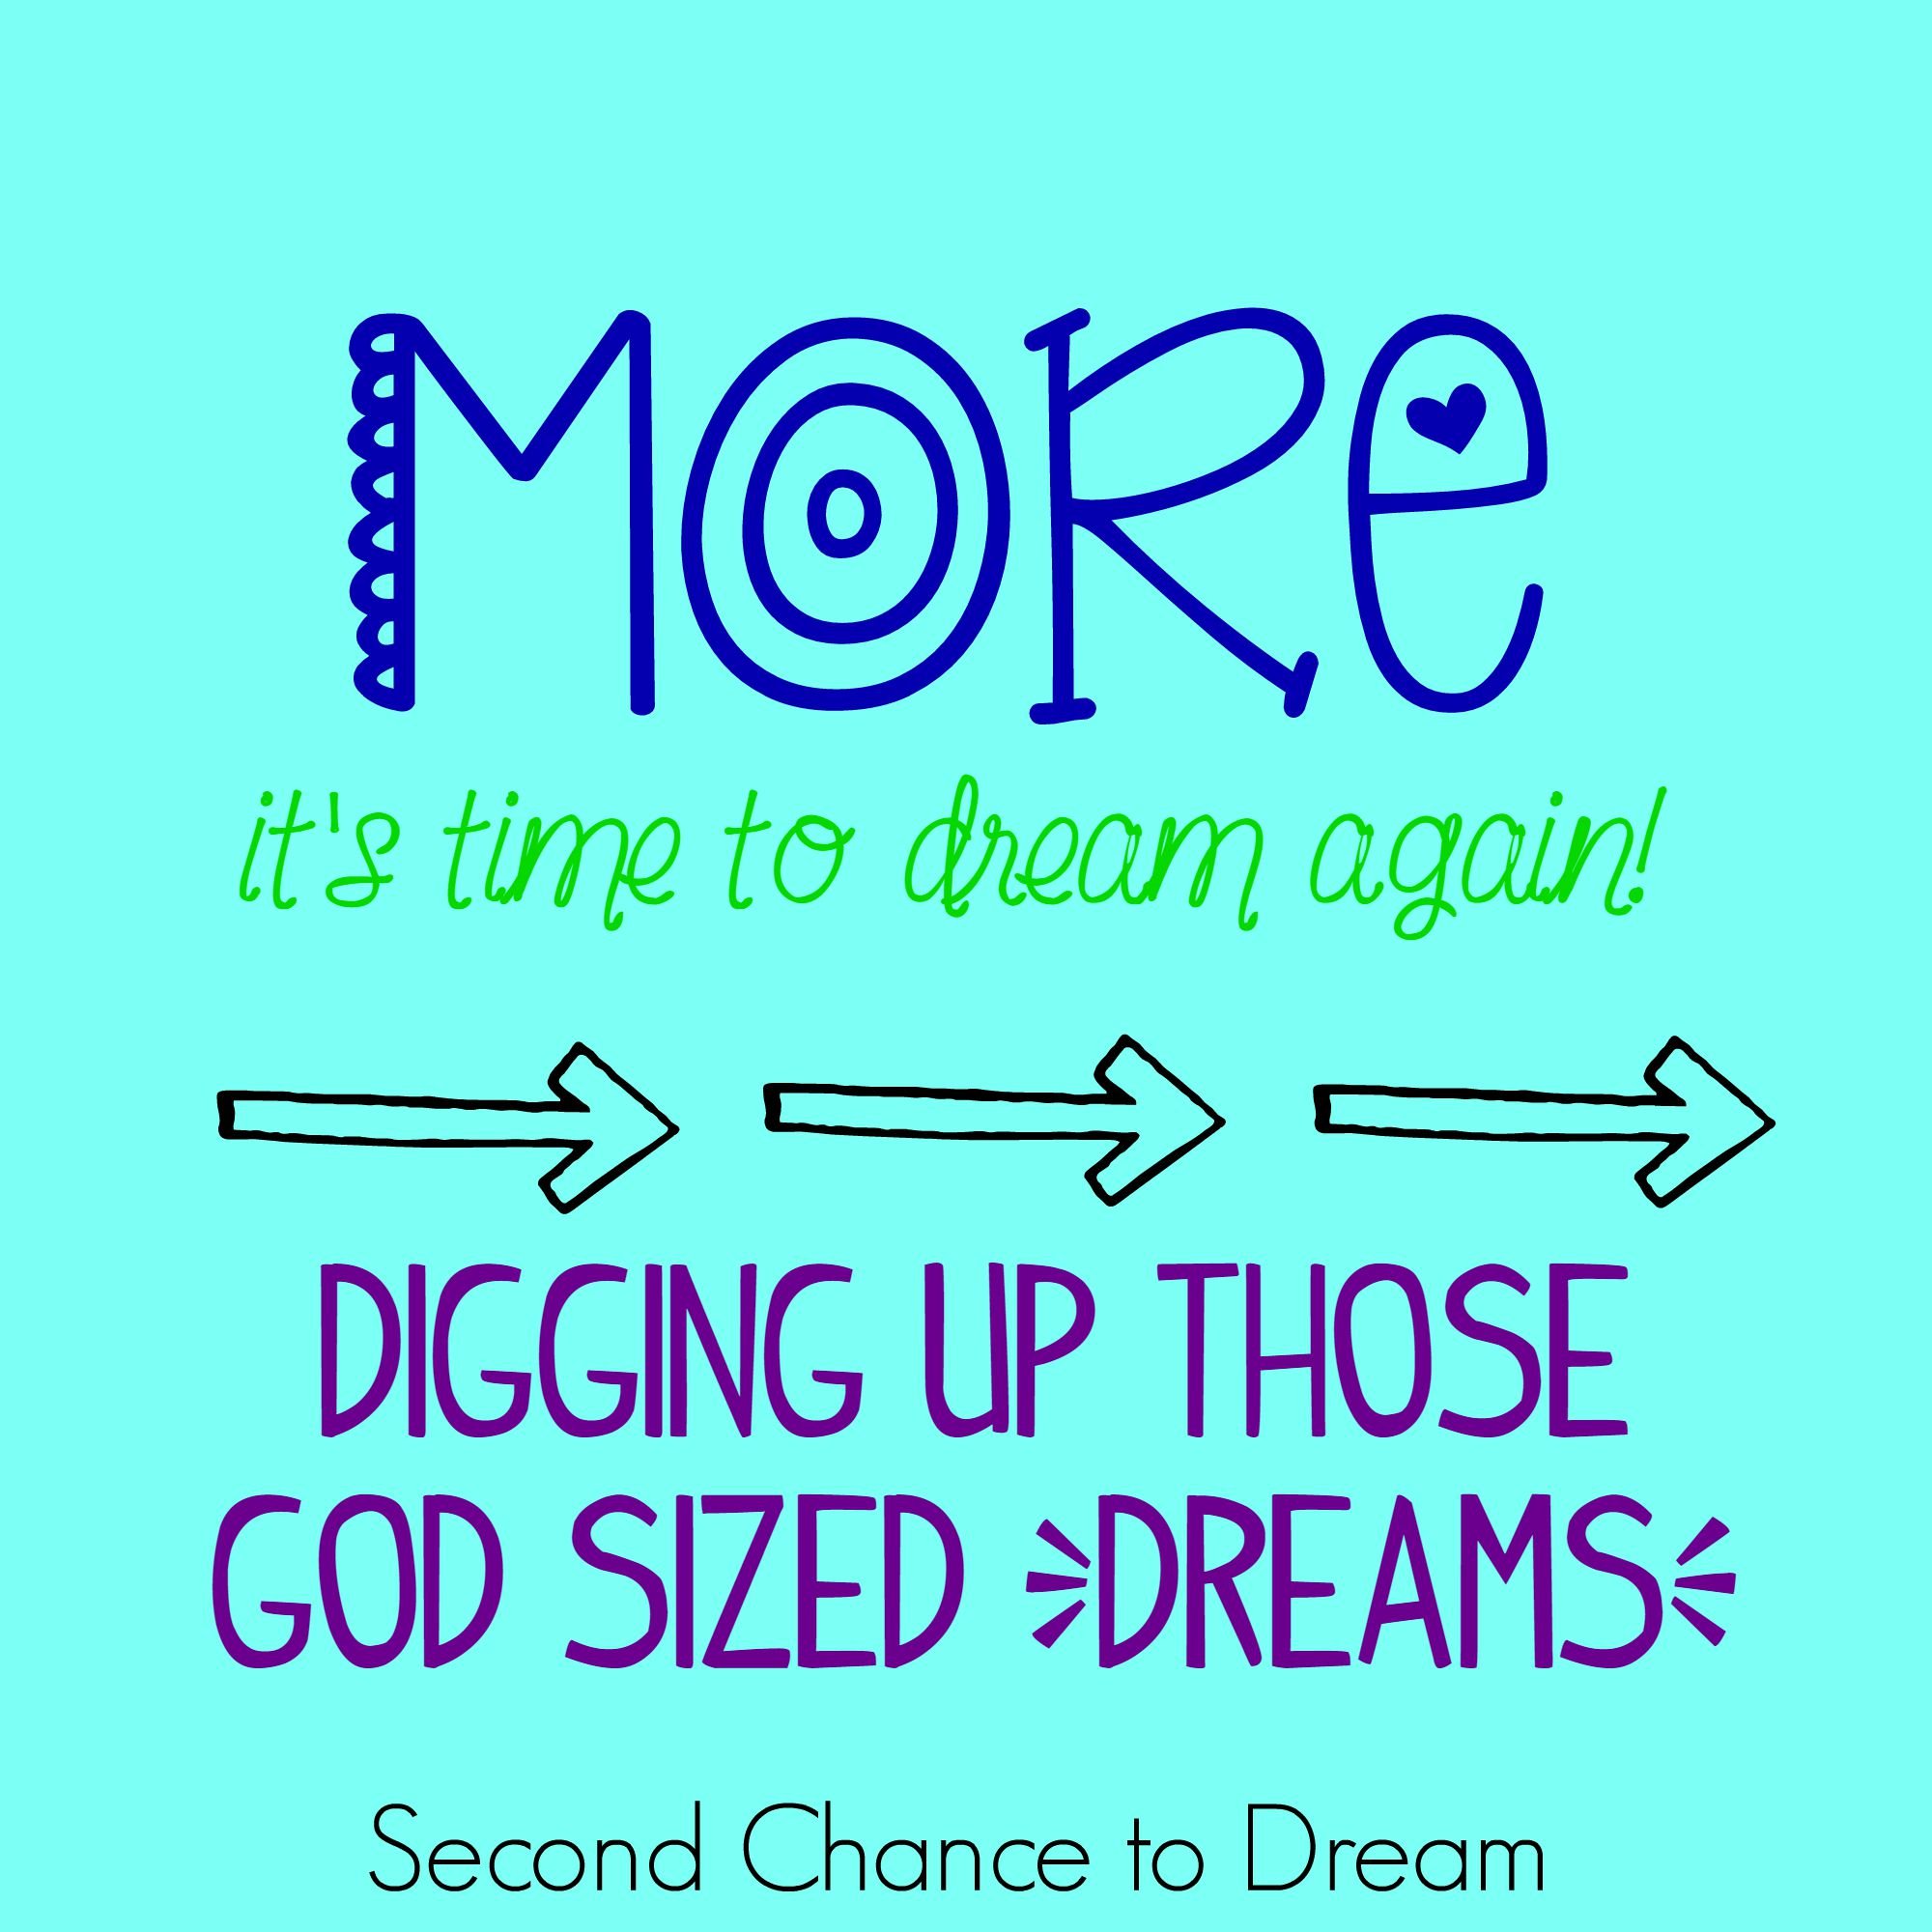 SecondChance to Dream: Digging up those God sized Dreams